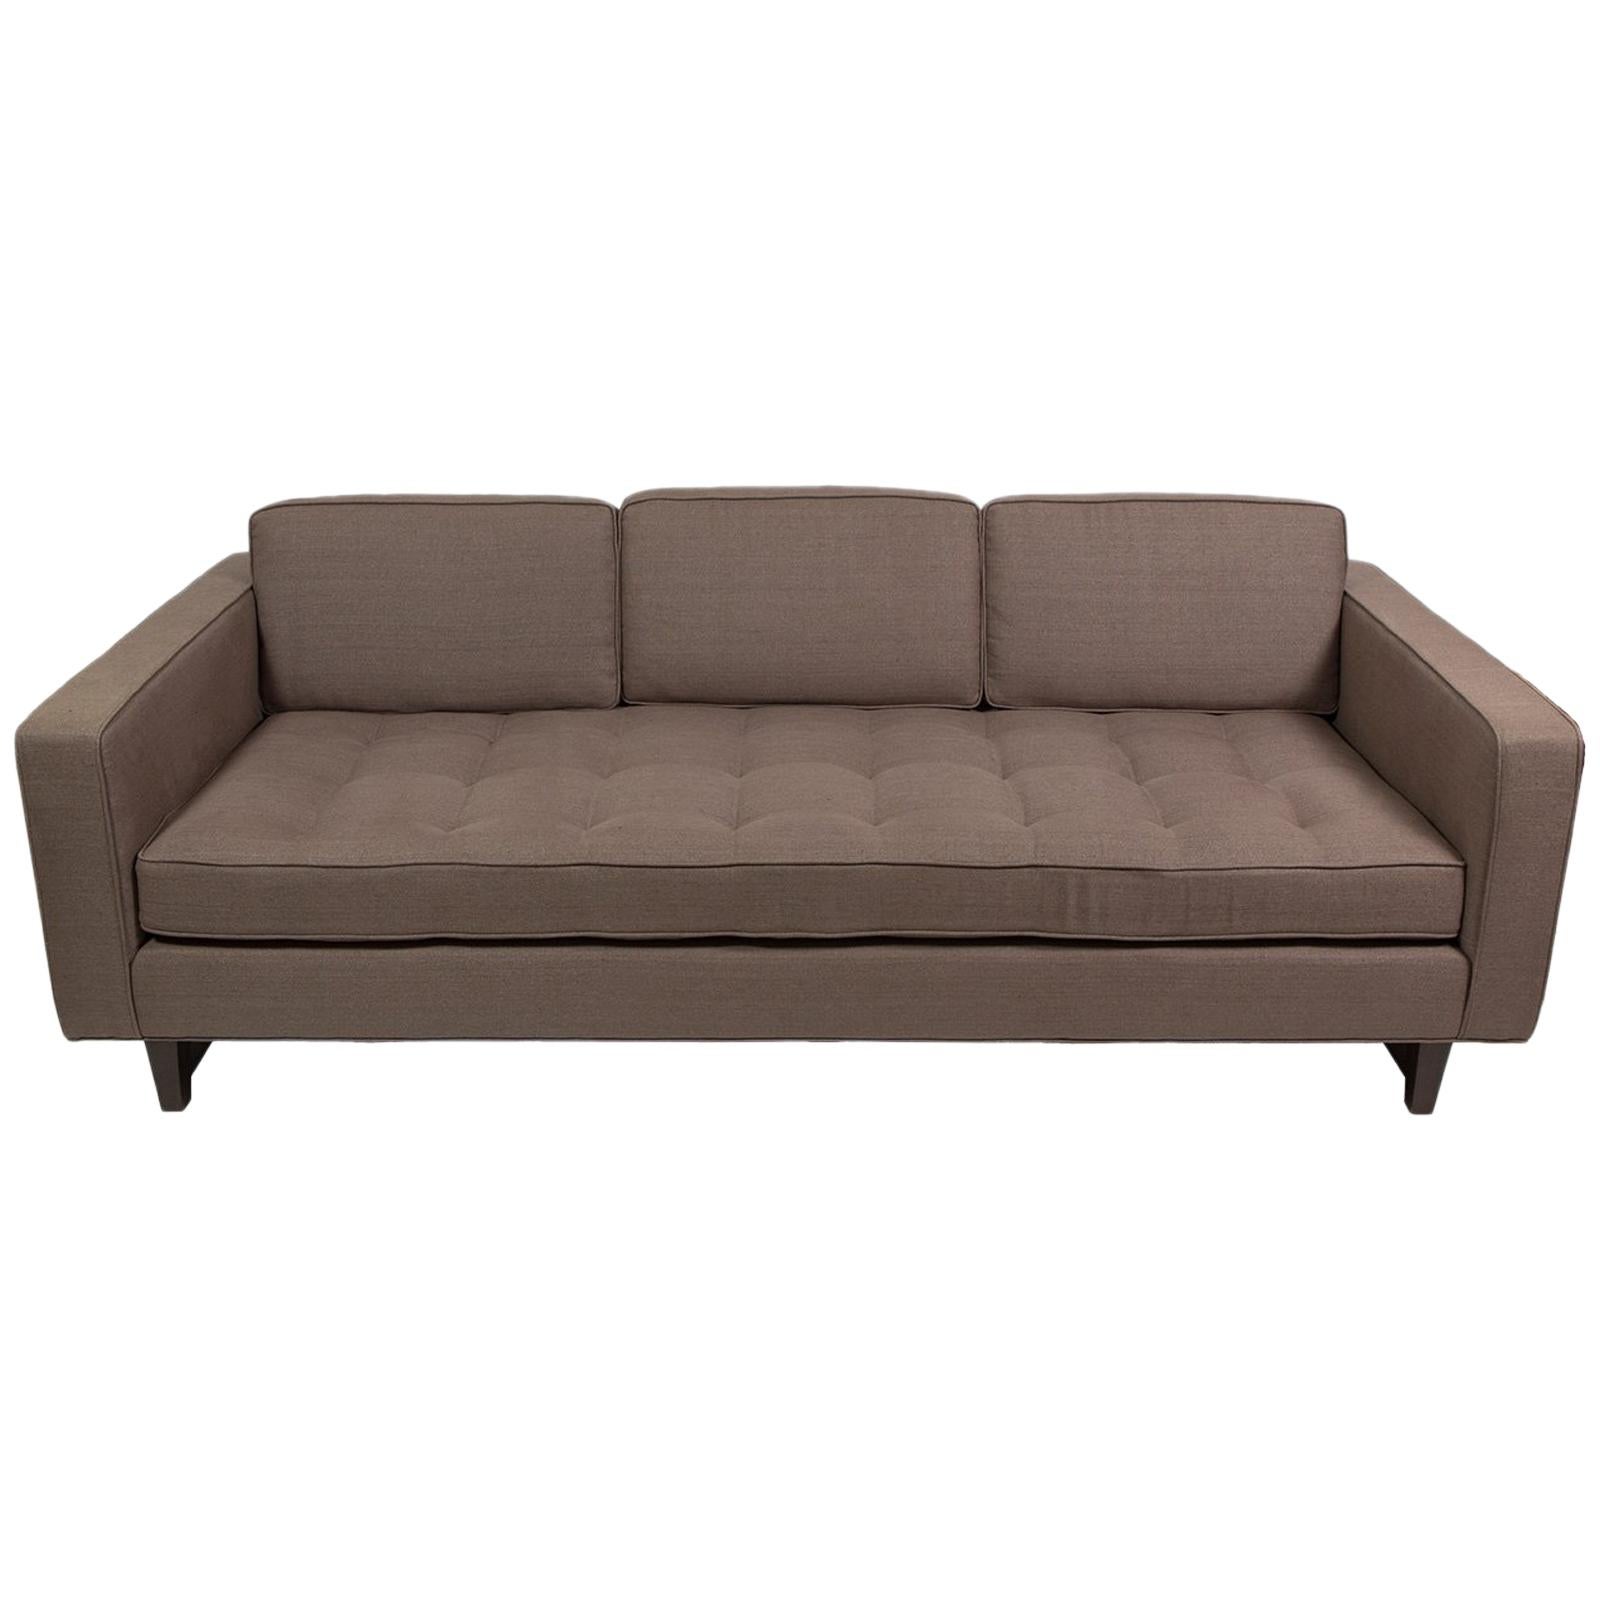 Three-Seat Sofa with Walnut Frame and Button Tufted Seat in Grey Linen